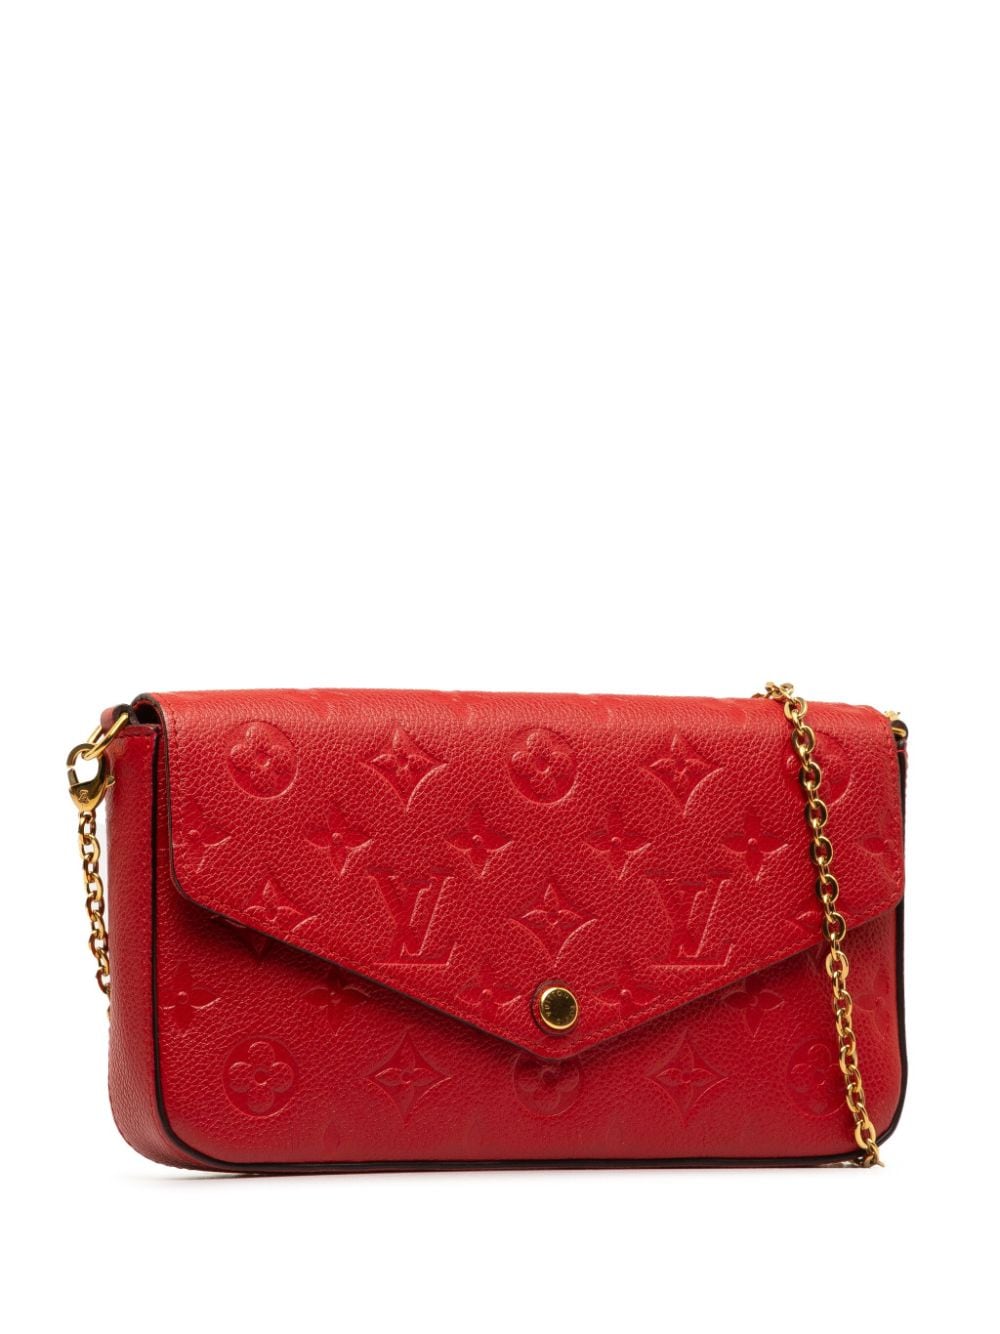 Pre-owned Louis Vuitton 2018 Pochette Félicie Clutch Bag In Red